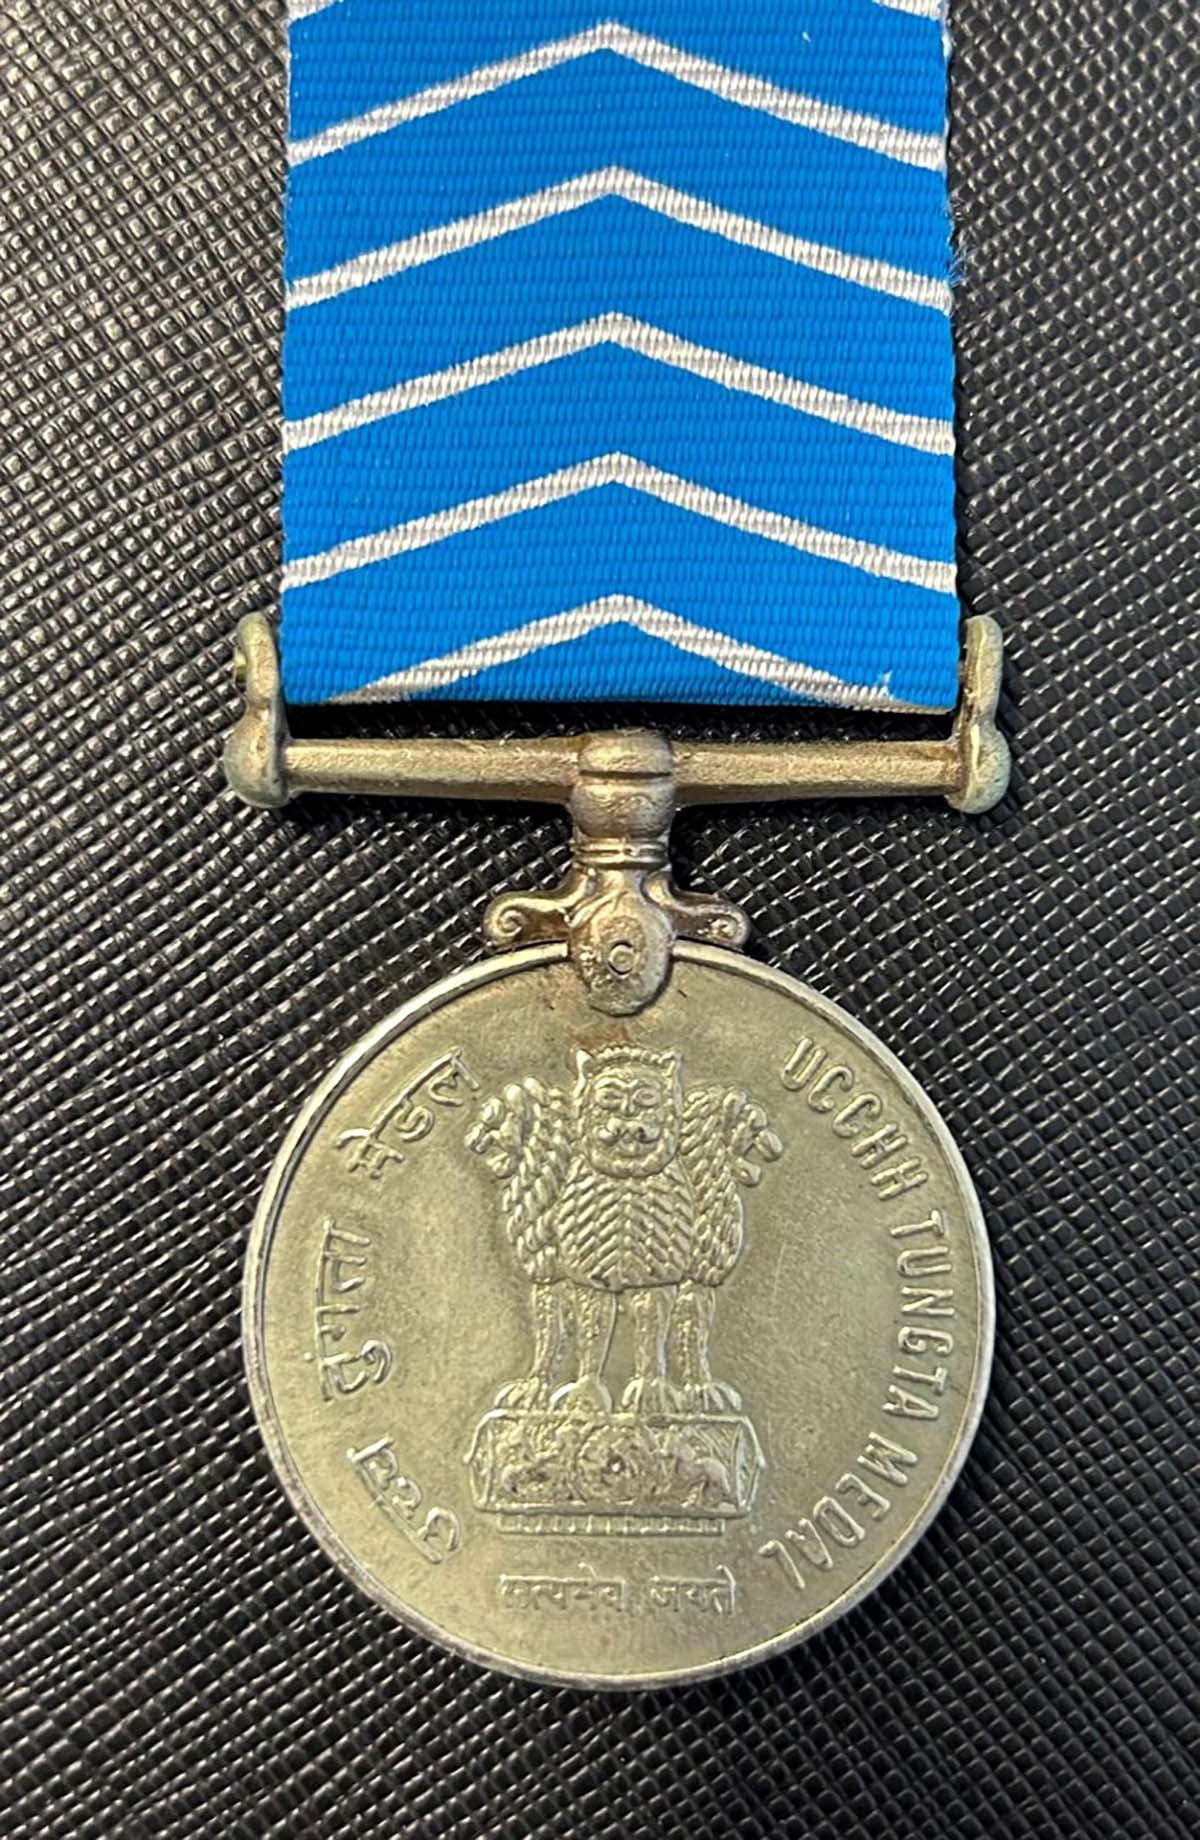 Worcestershire Medal Service: India - Service at High Altitude